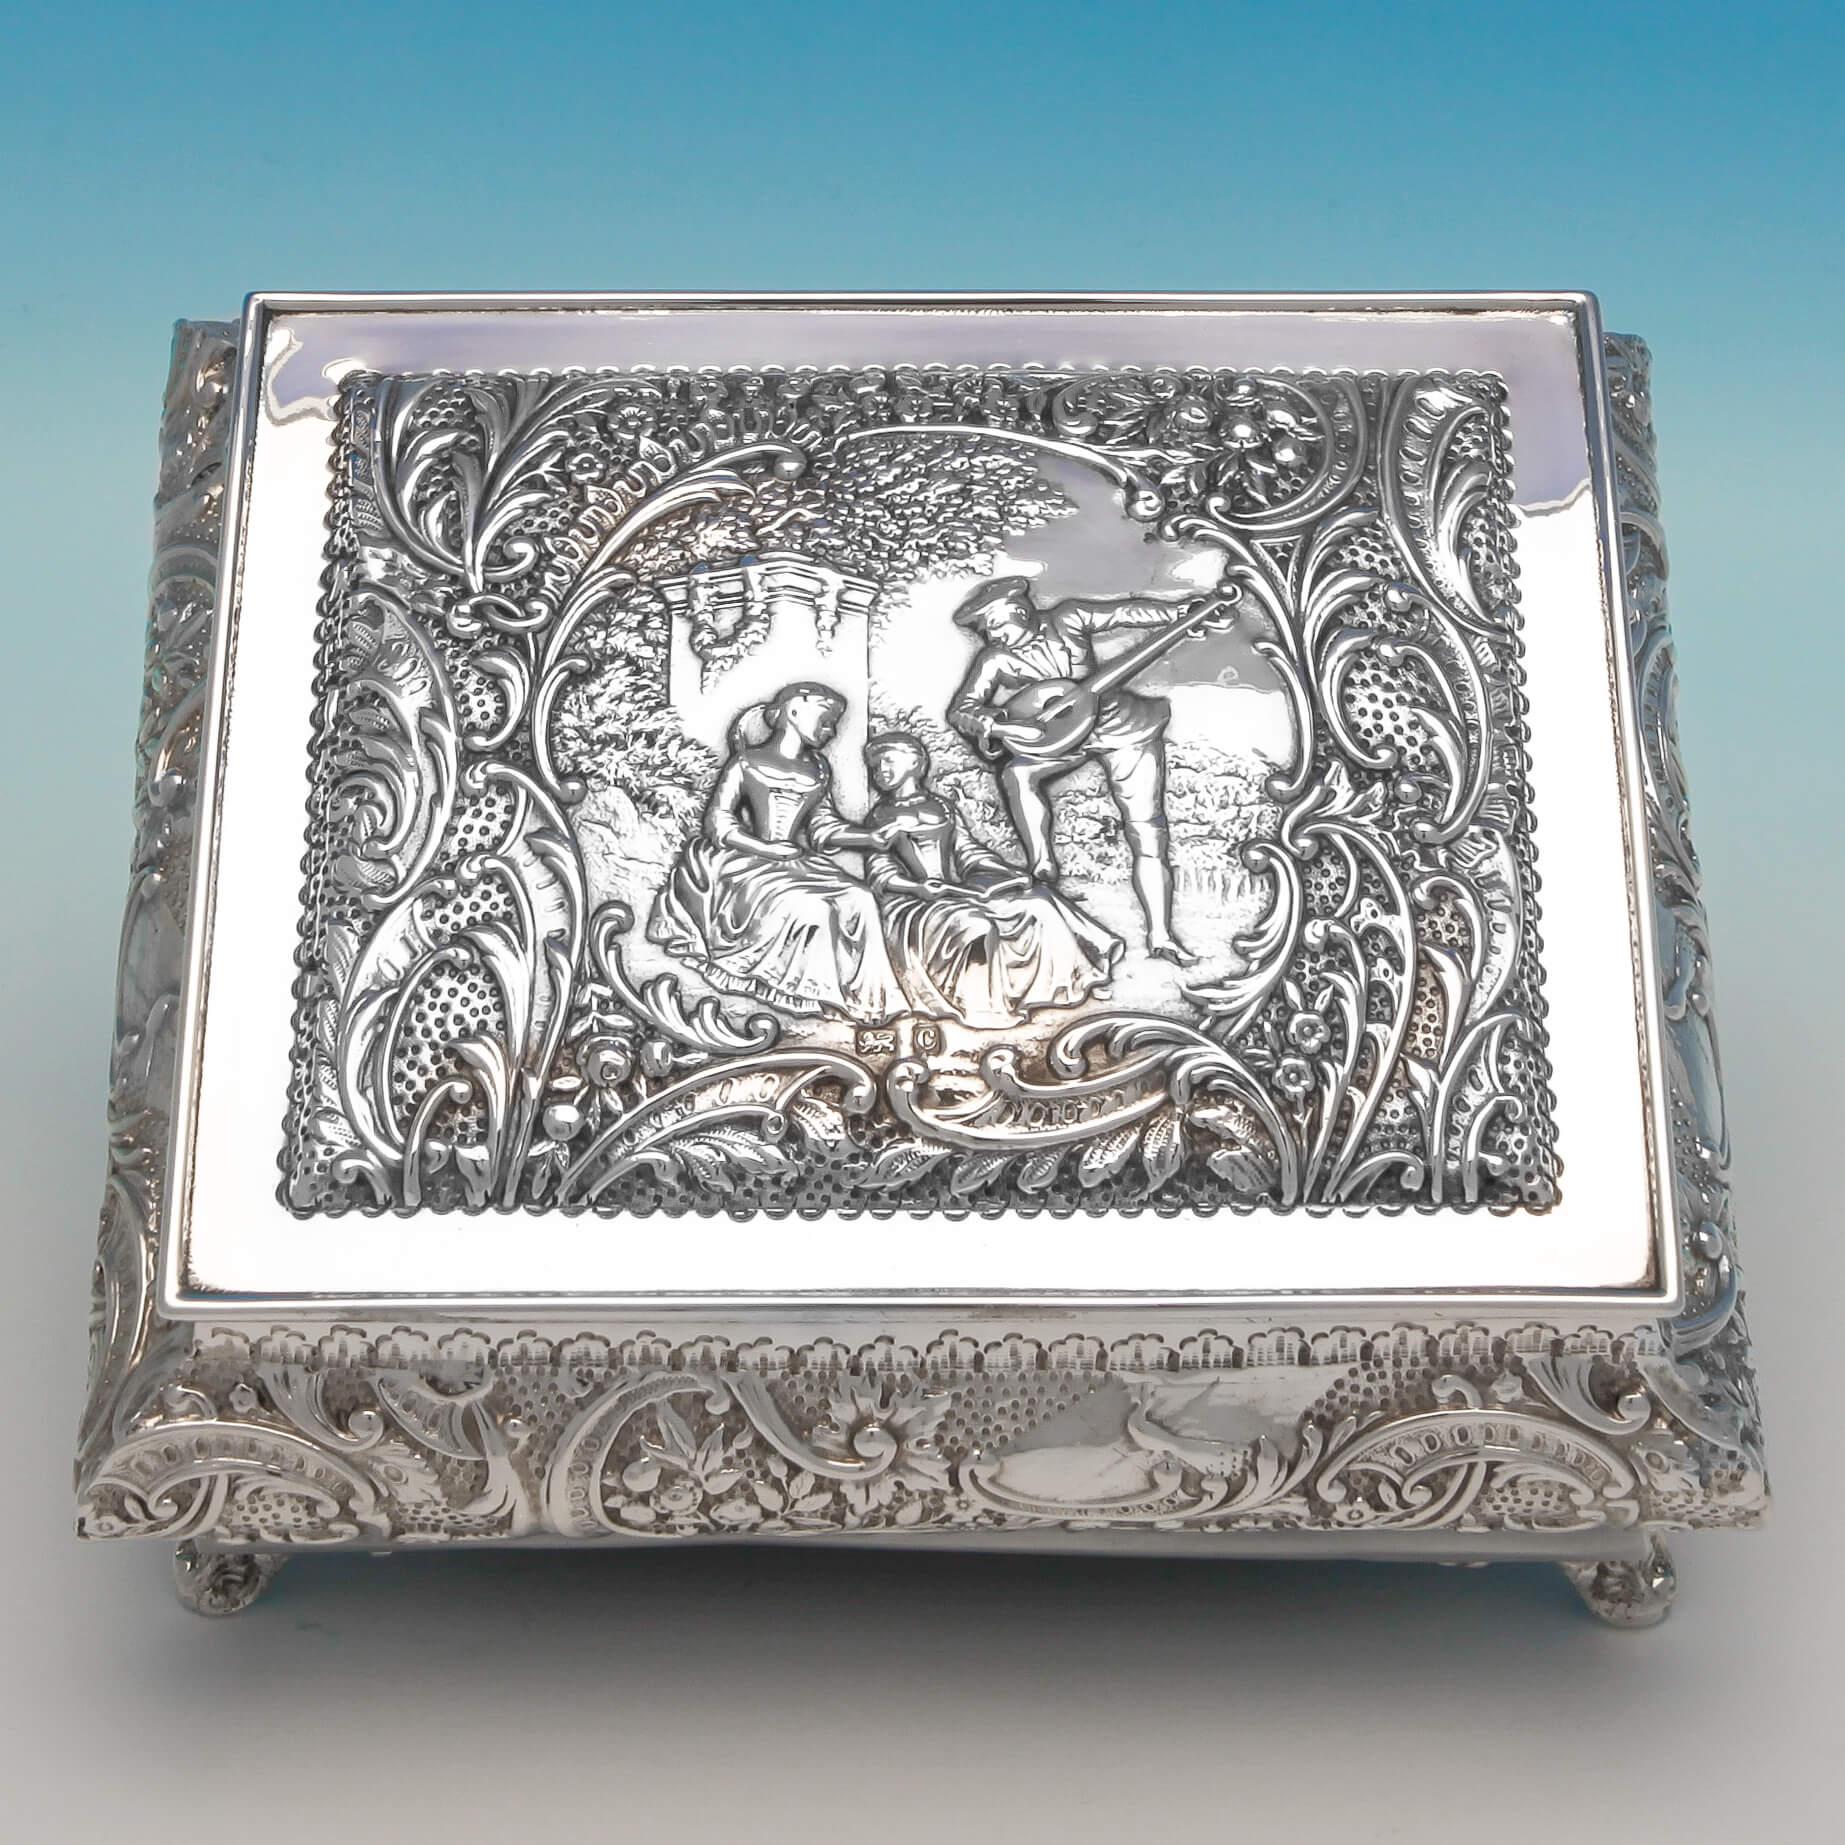 English Large Antique Art Nouveau Period Sterling Silver Jewellery Box from 1902 